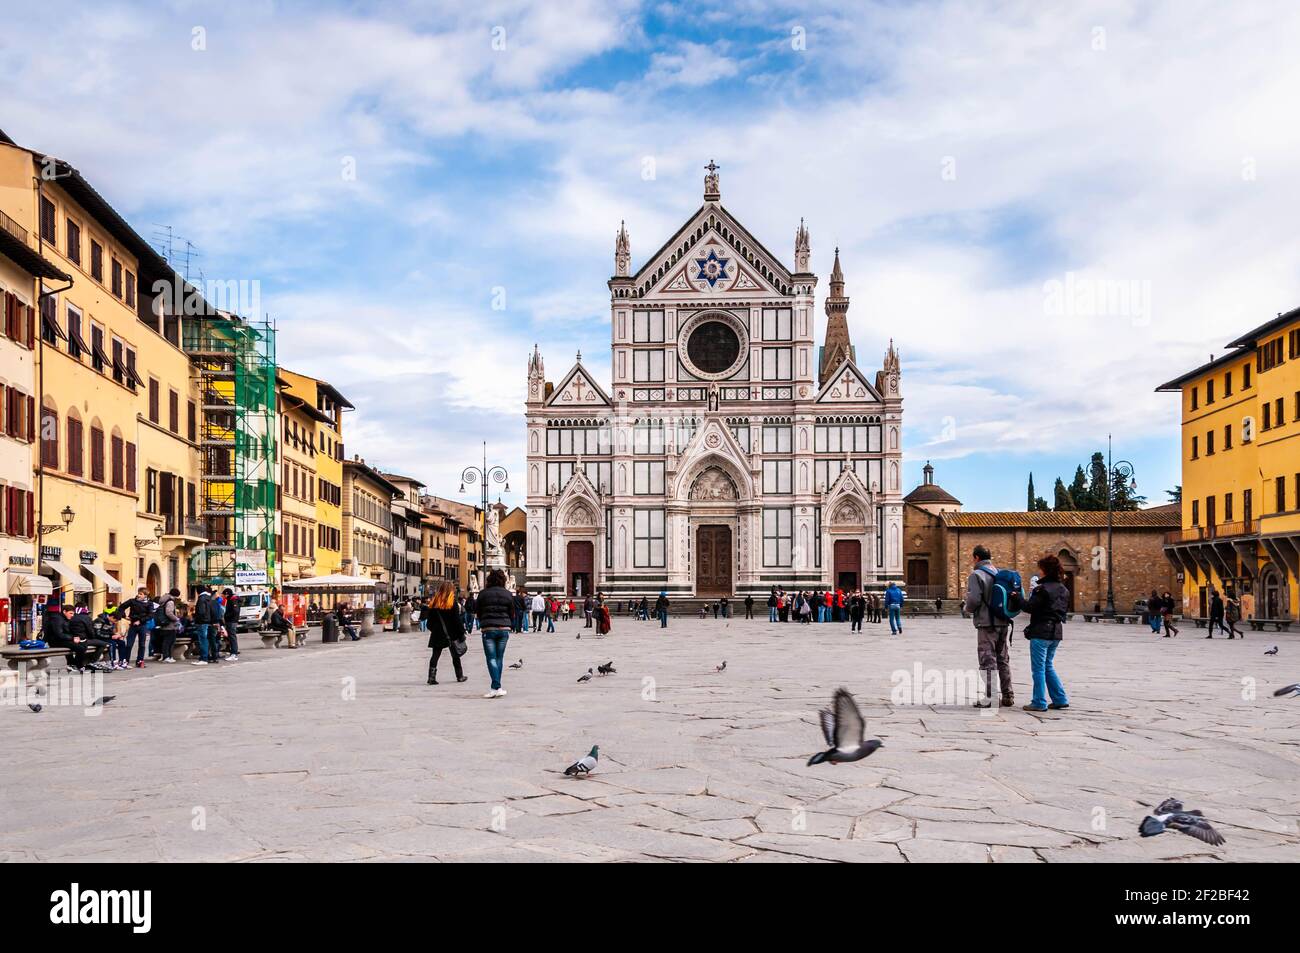 Piazza Santa Croce and its basilica in the background in Florence in Tuscany, Italy Stock Photo